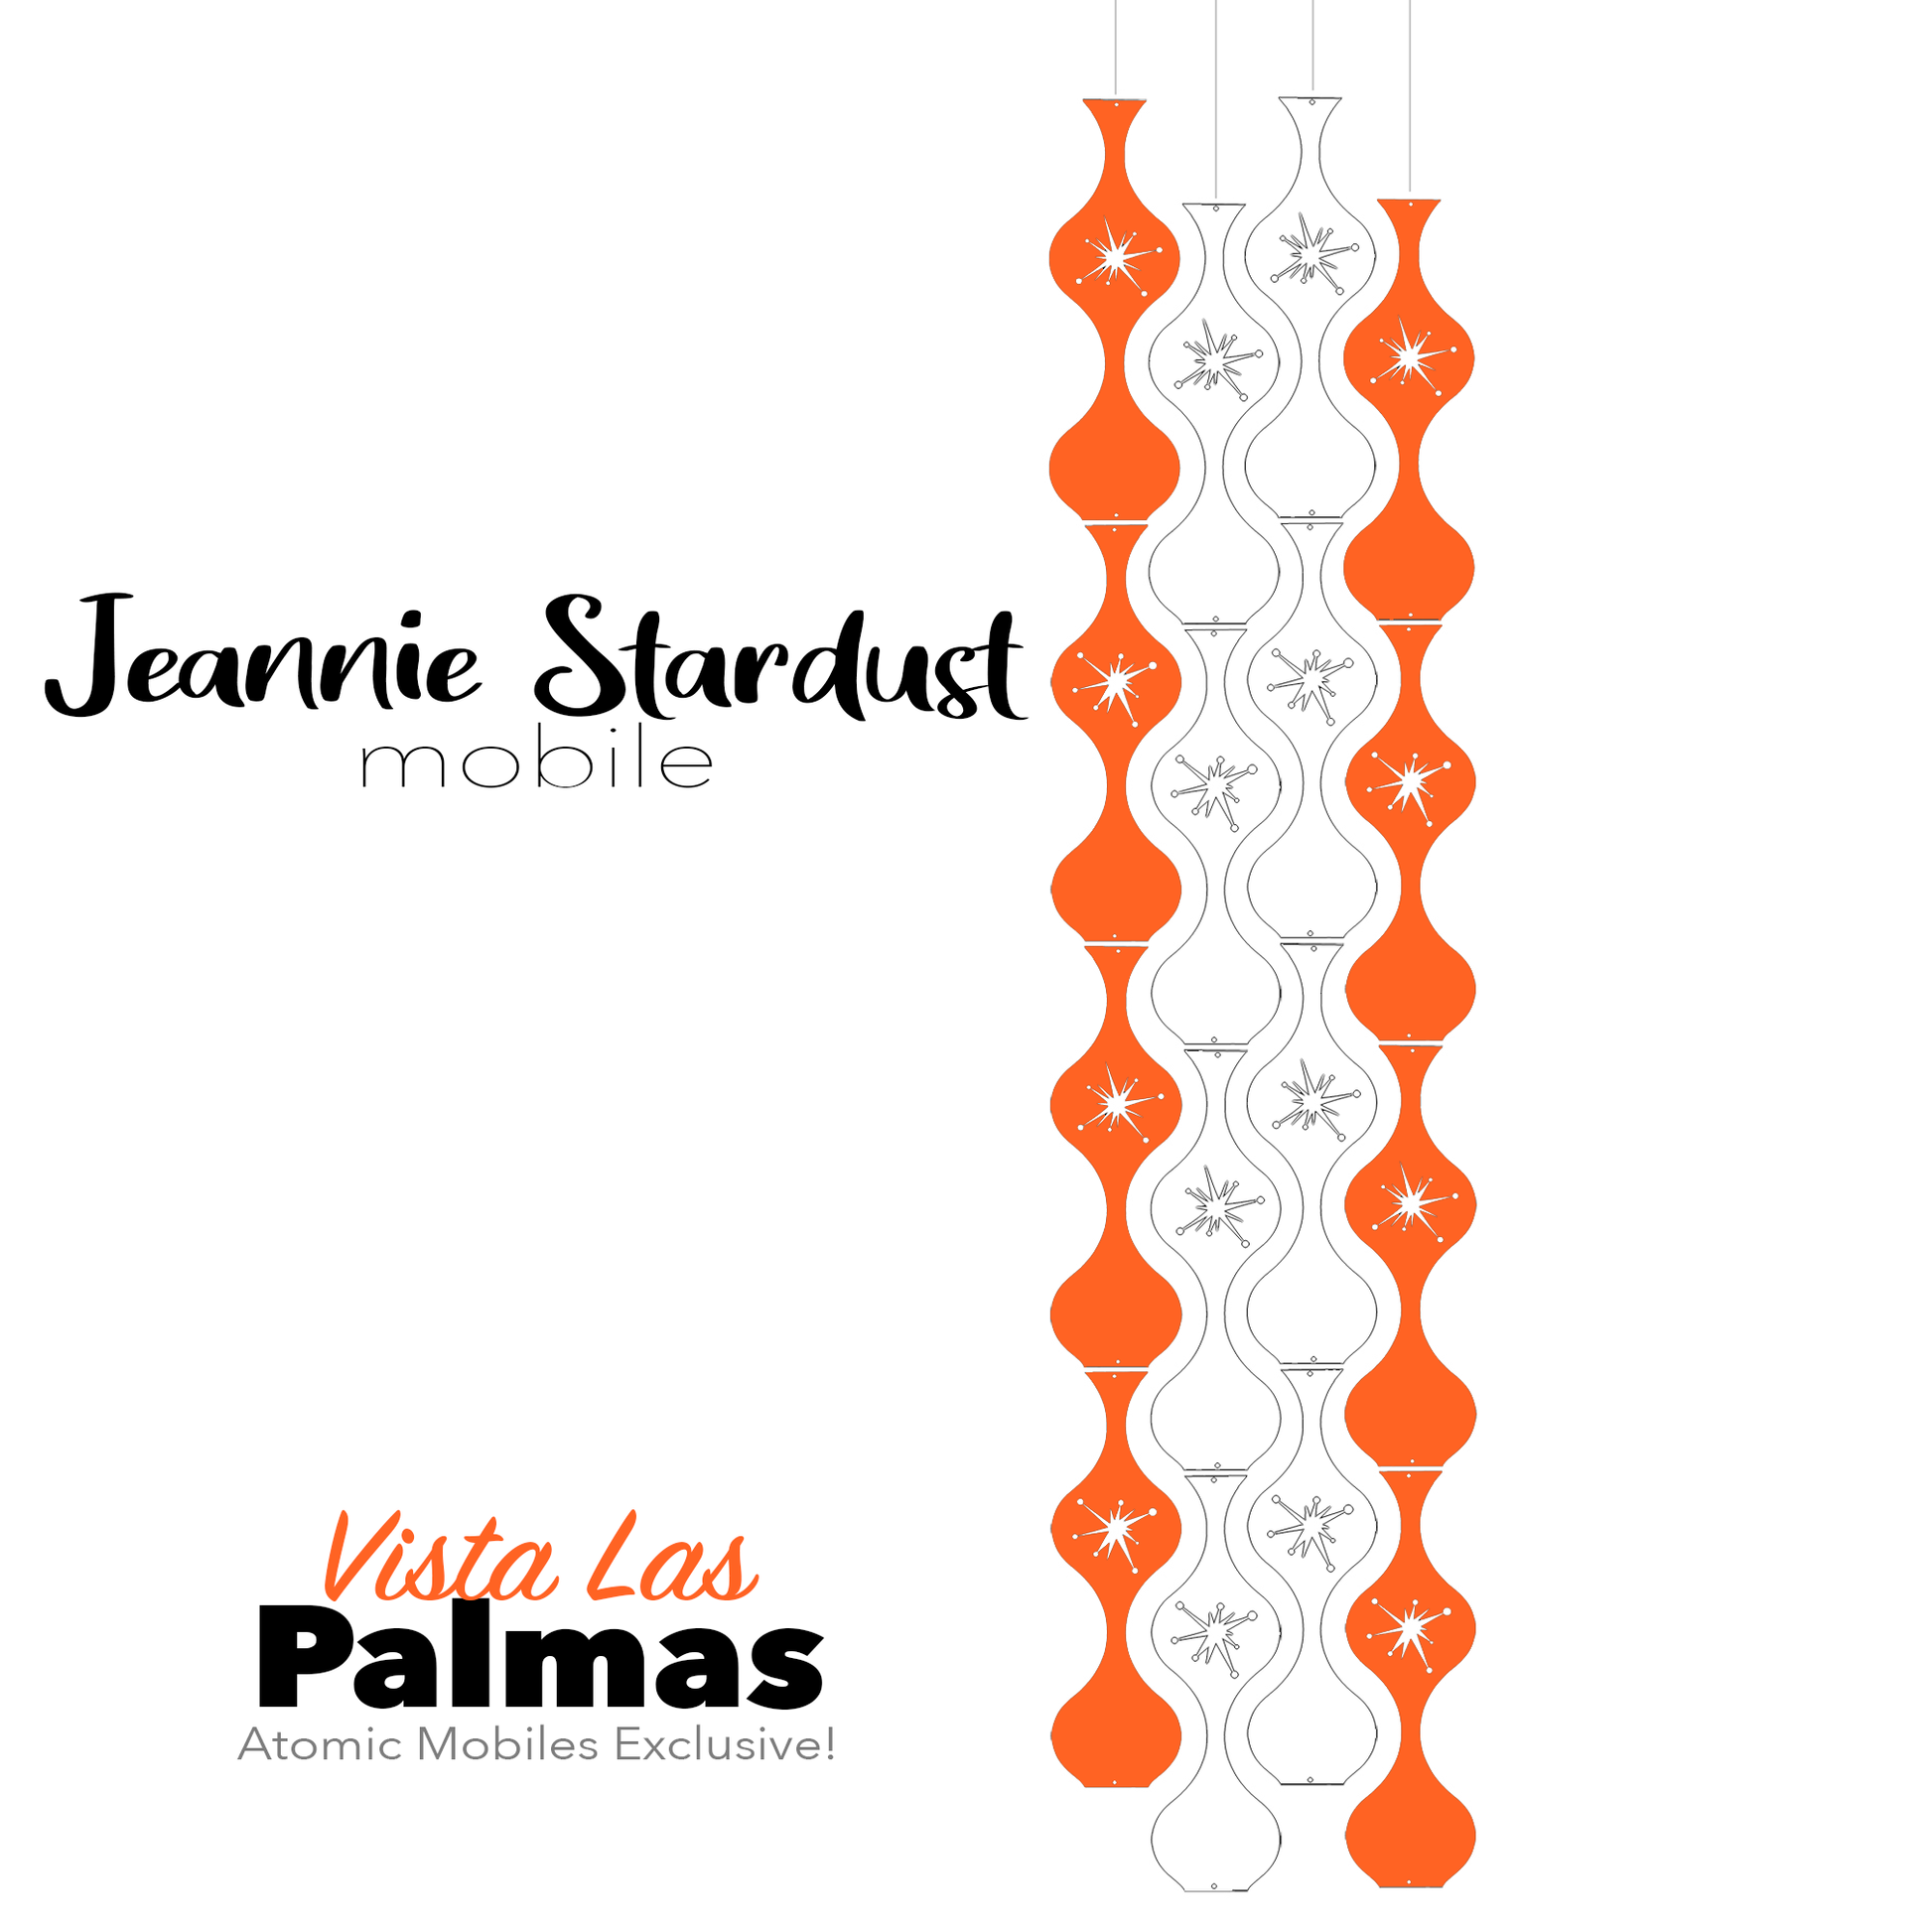 Vista Las Palmas Jeannie Stardust Hanging Art Mobile - mid century modern home decor in Orange and White - by AtomicMobiles.com